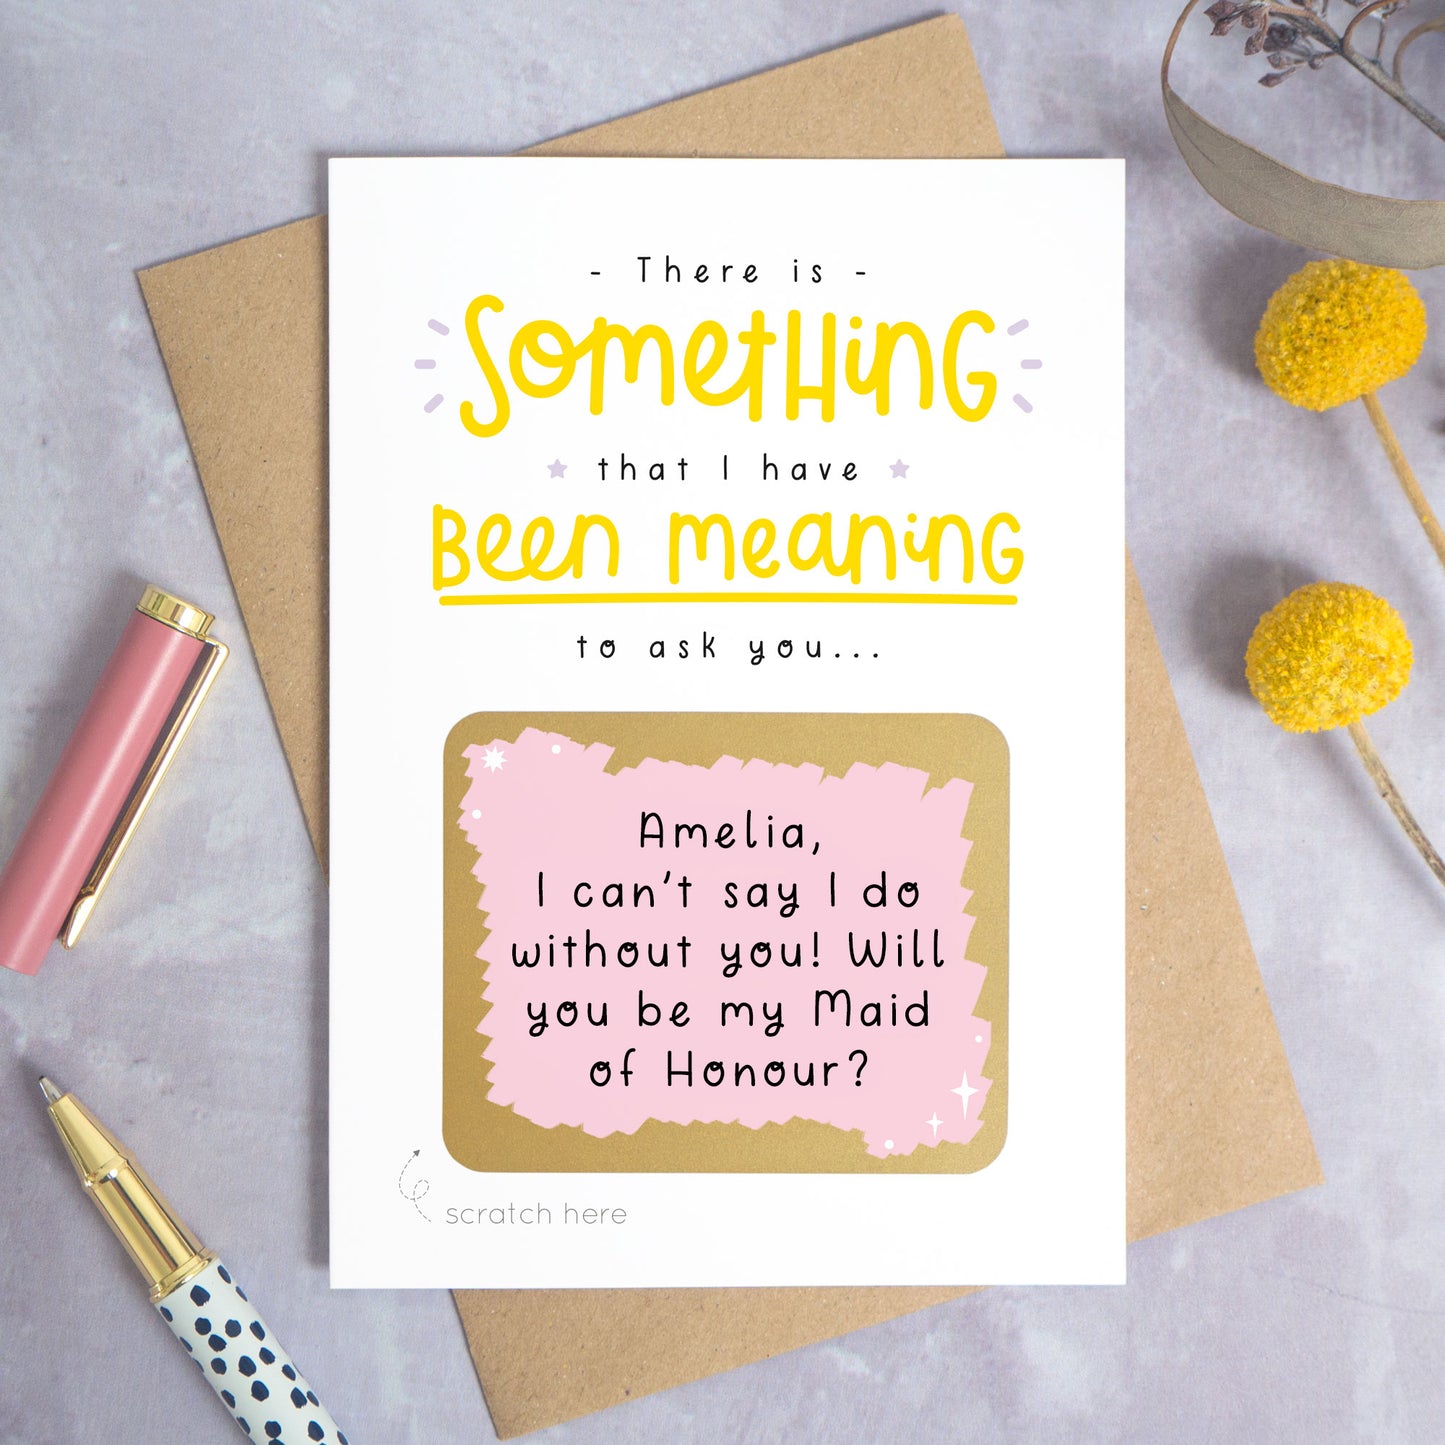 A personalised custom question scratch card photographed on a grey background with yellow flowers and a pink pen lid and spotty pen. The card is lying on a kraft brown envelope and the scratch box has been scratched off to reveal the personalised message. This is the yellow and pink colour way.